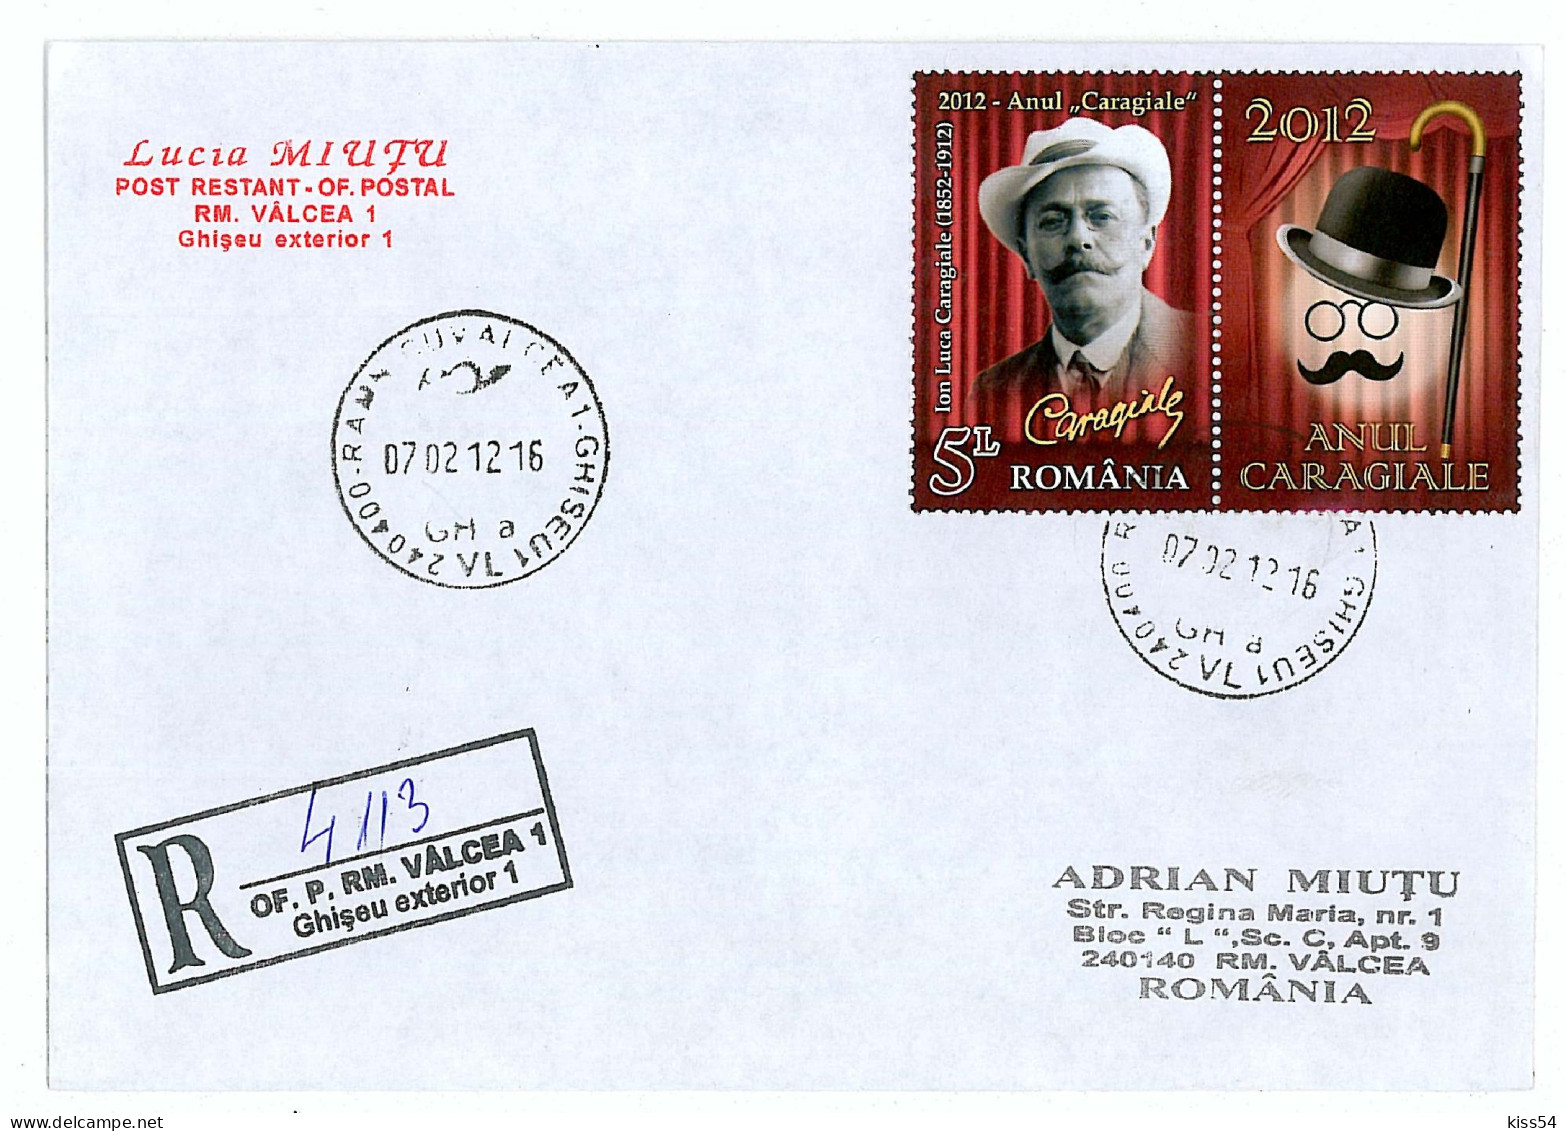 NCP 25 - 4113-a Comic THEATRE Caragiale, Romania - Registered, Stamp With Vignette - 2012 - Covers & Documents